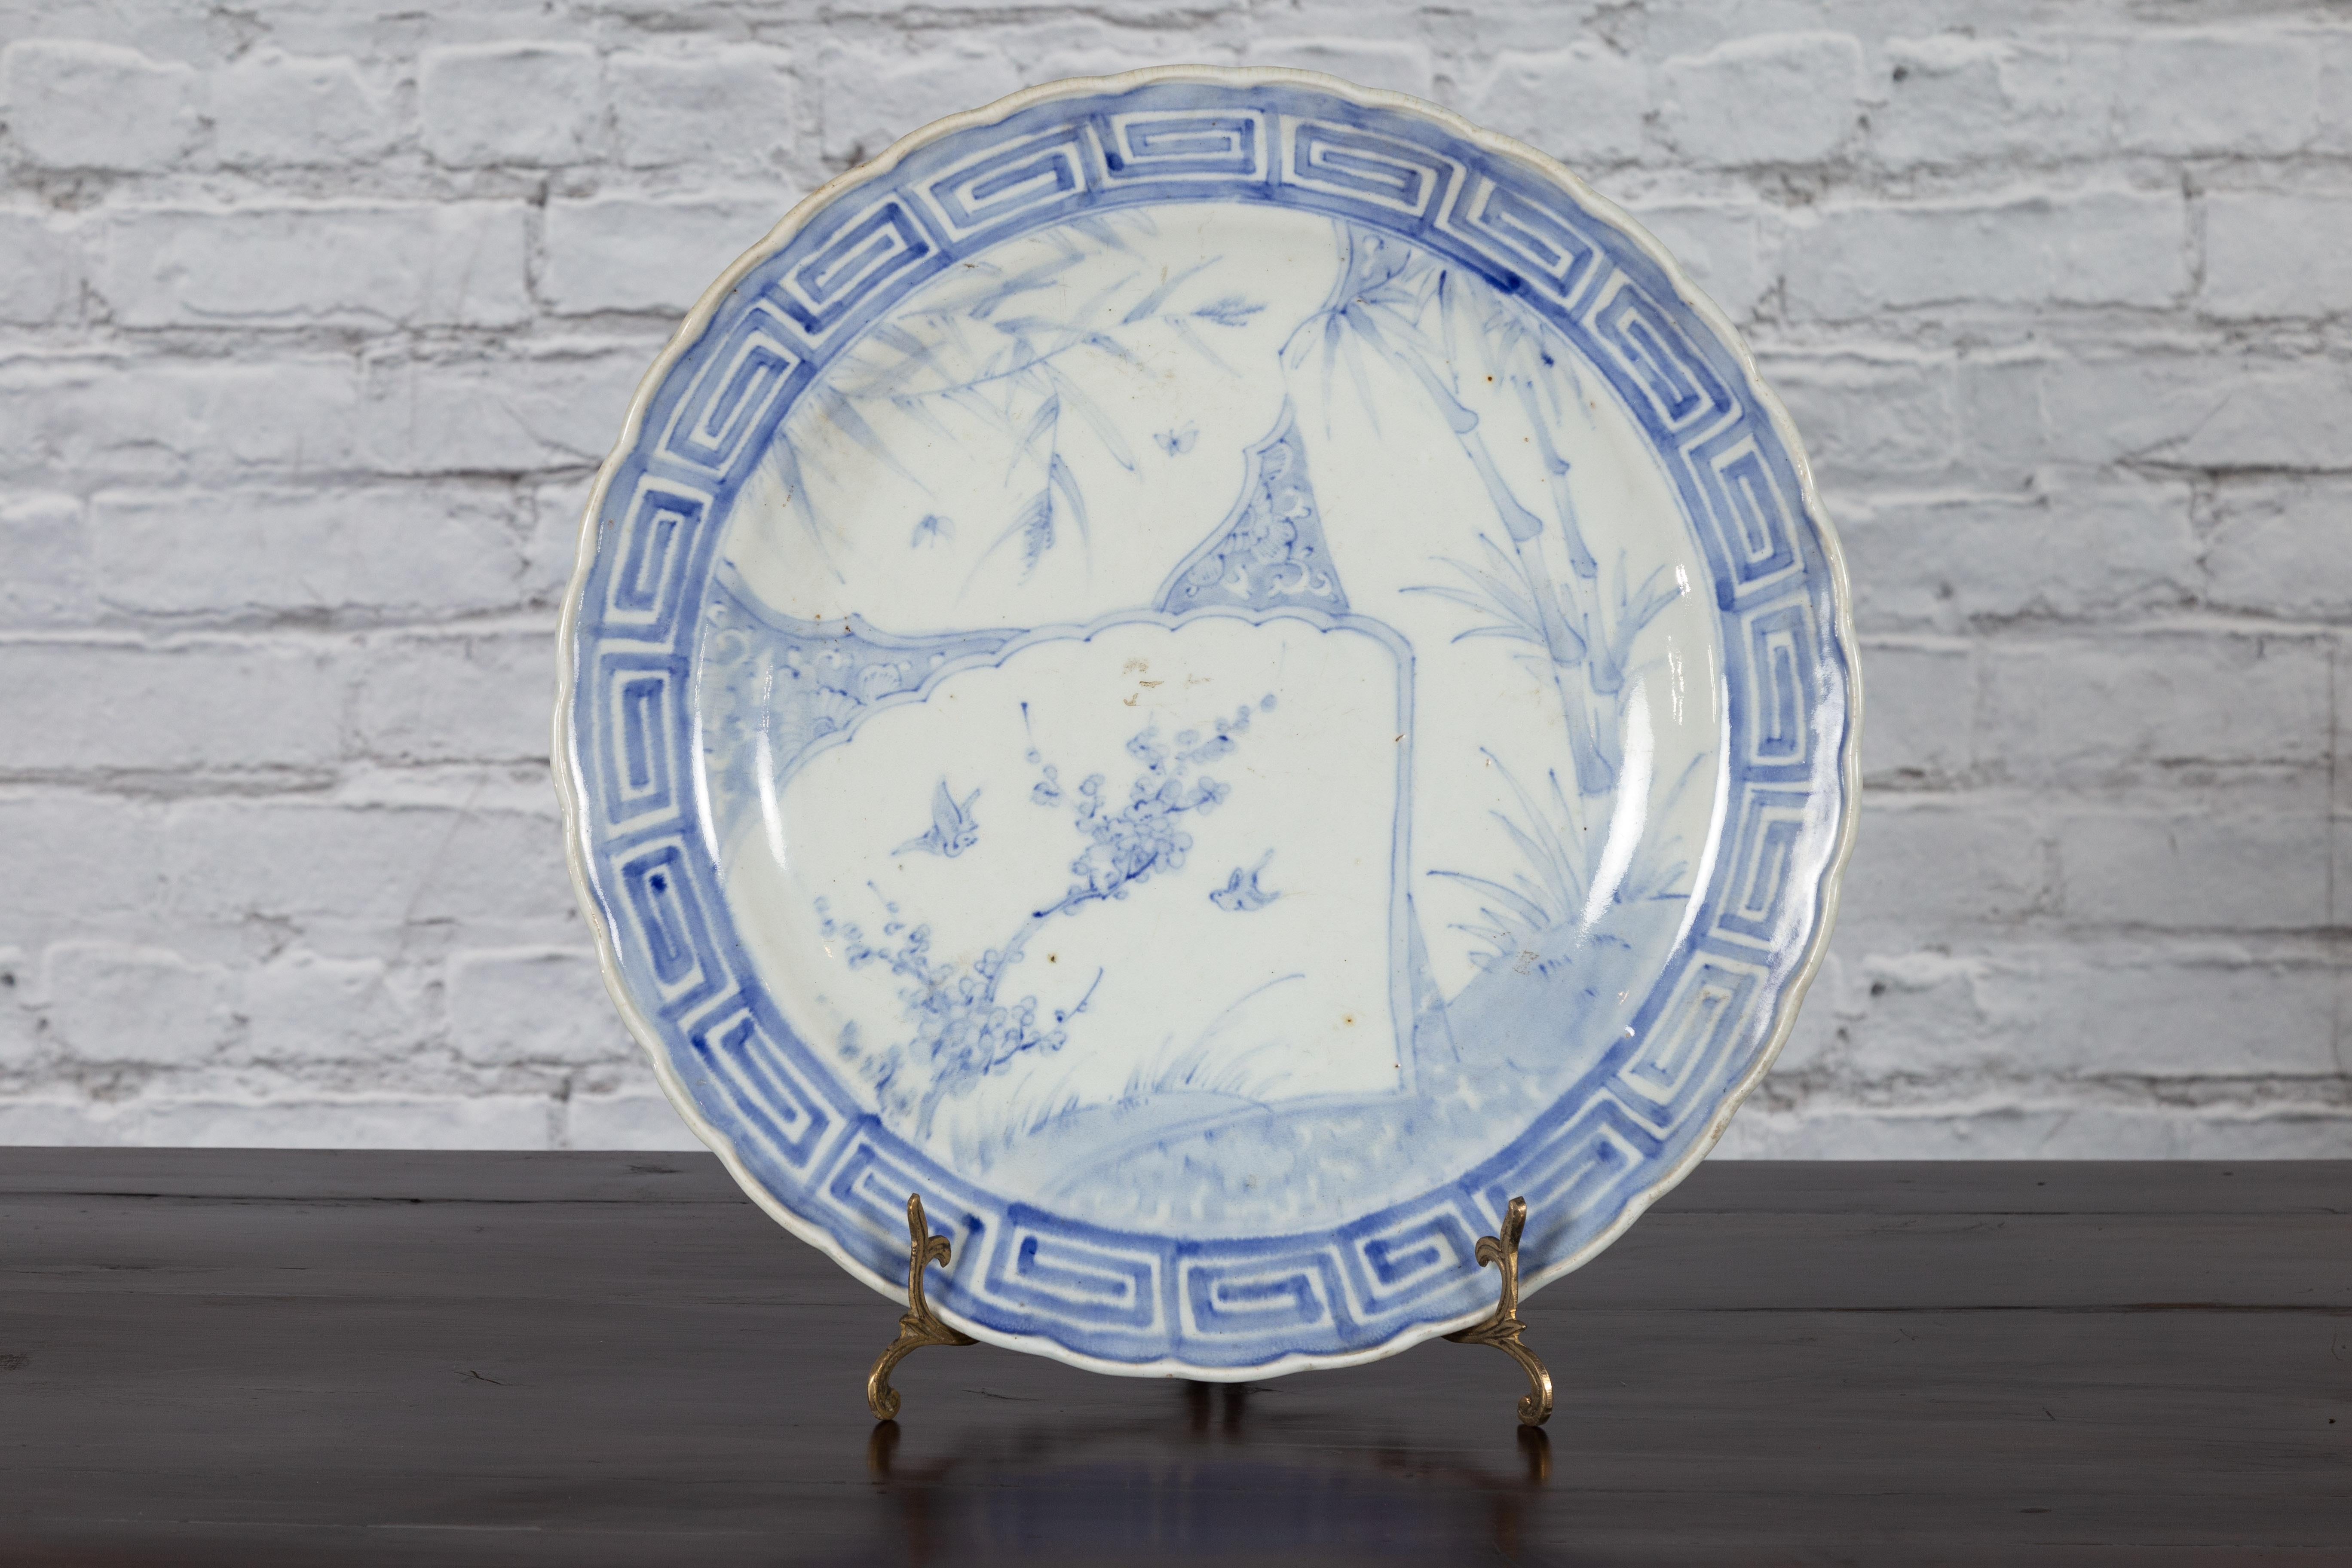 A Japanese hand-painted porcelain plate from the 19th century, with blue and white birds, foliage and bamboo décor. Created in Japan during the 19th century, this porcelain plate features a delicate blue and white décor depicting birds flying around